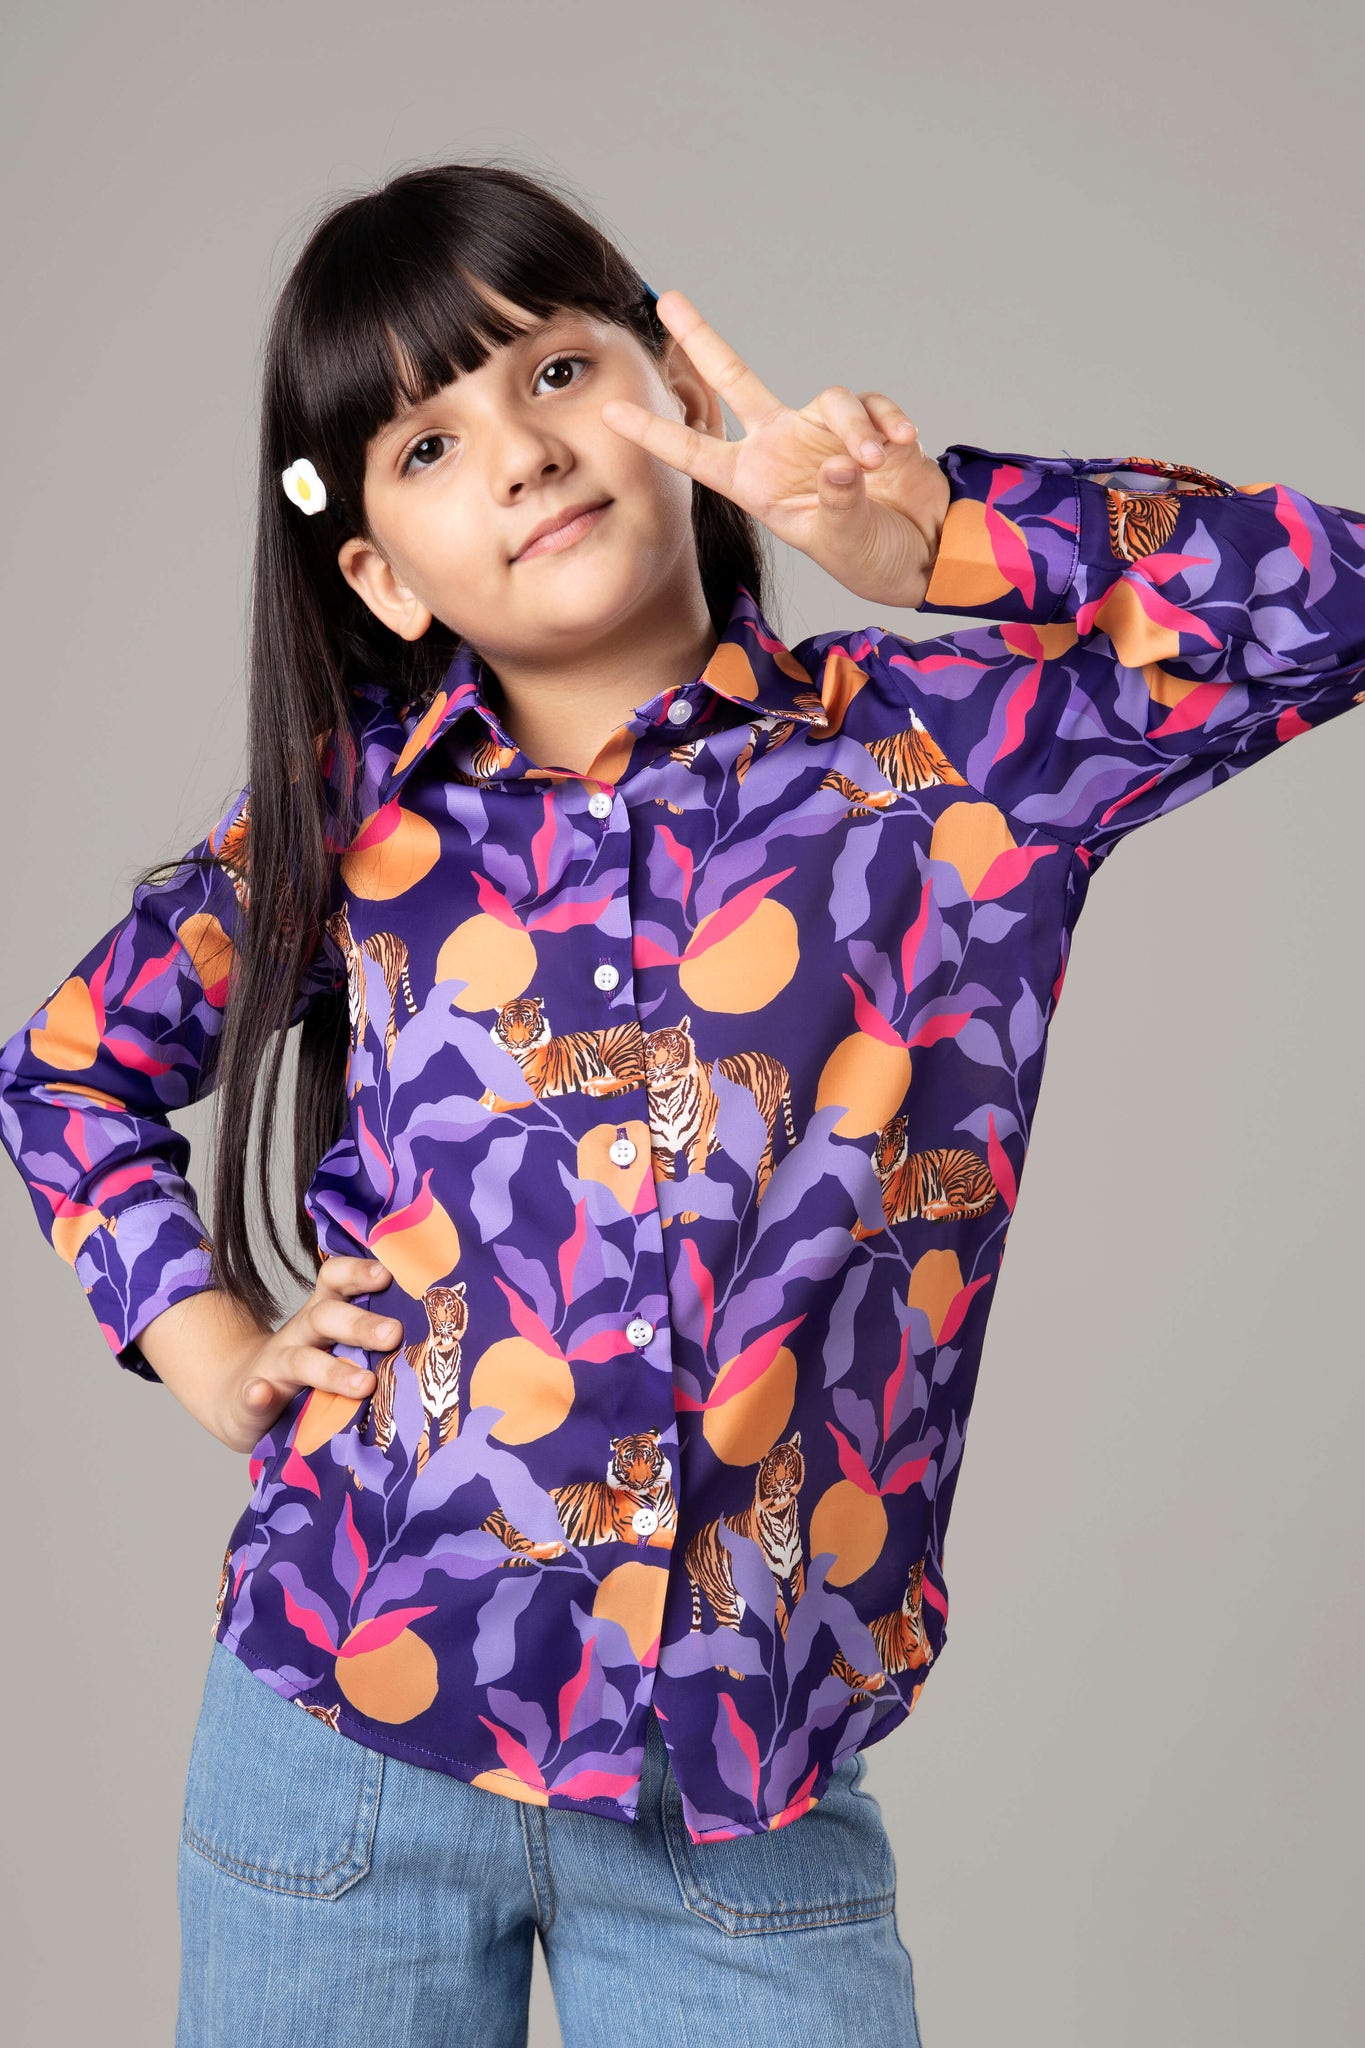 Exclusive Tiger Print Shirt For Girls